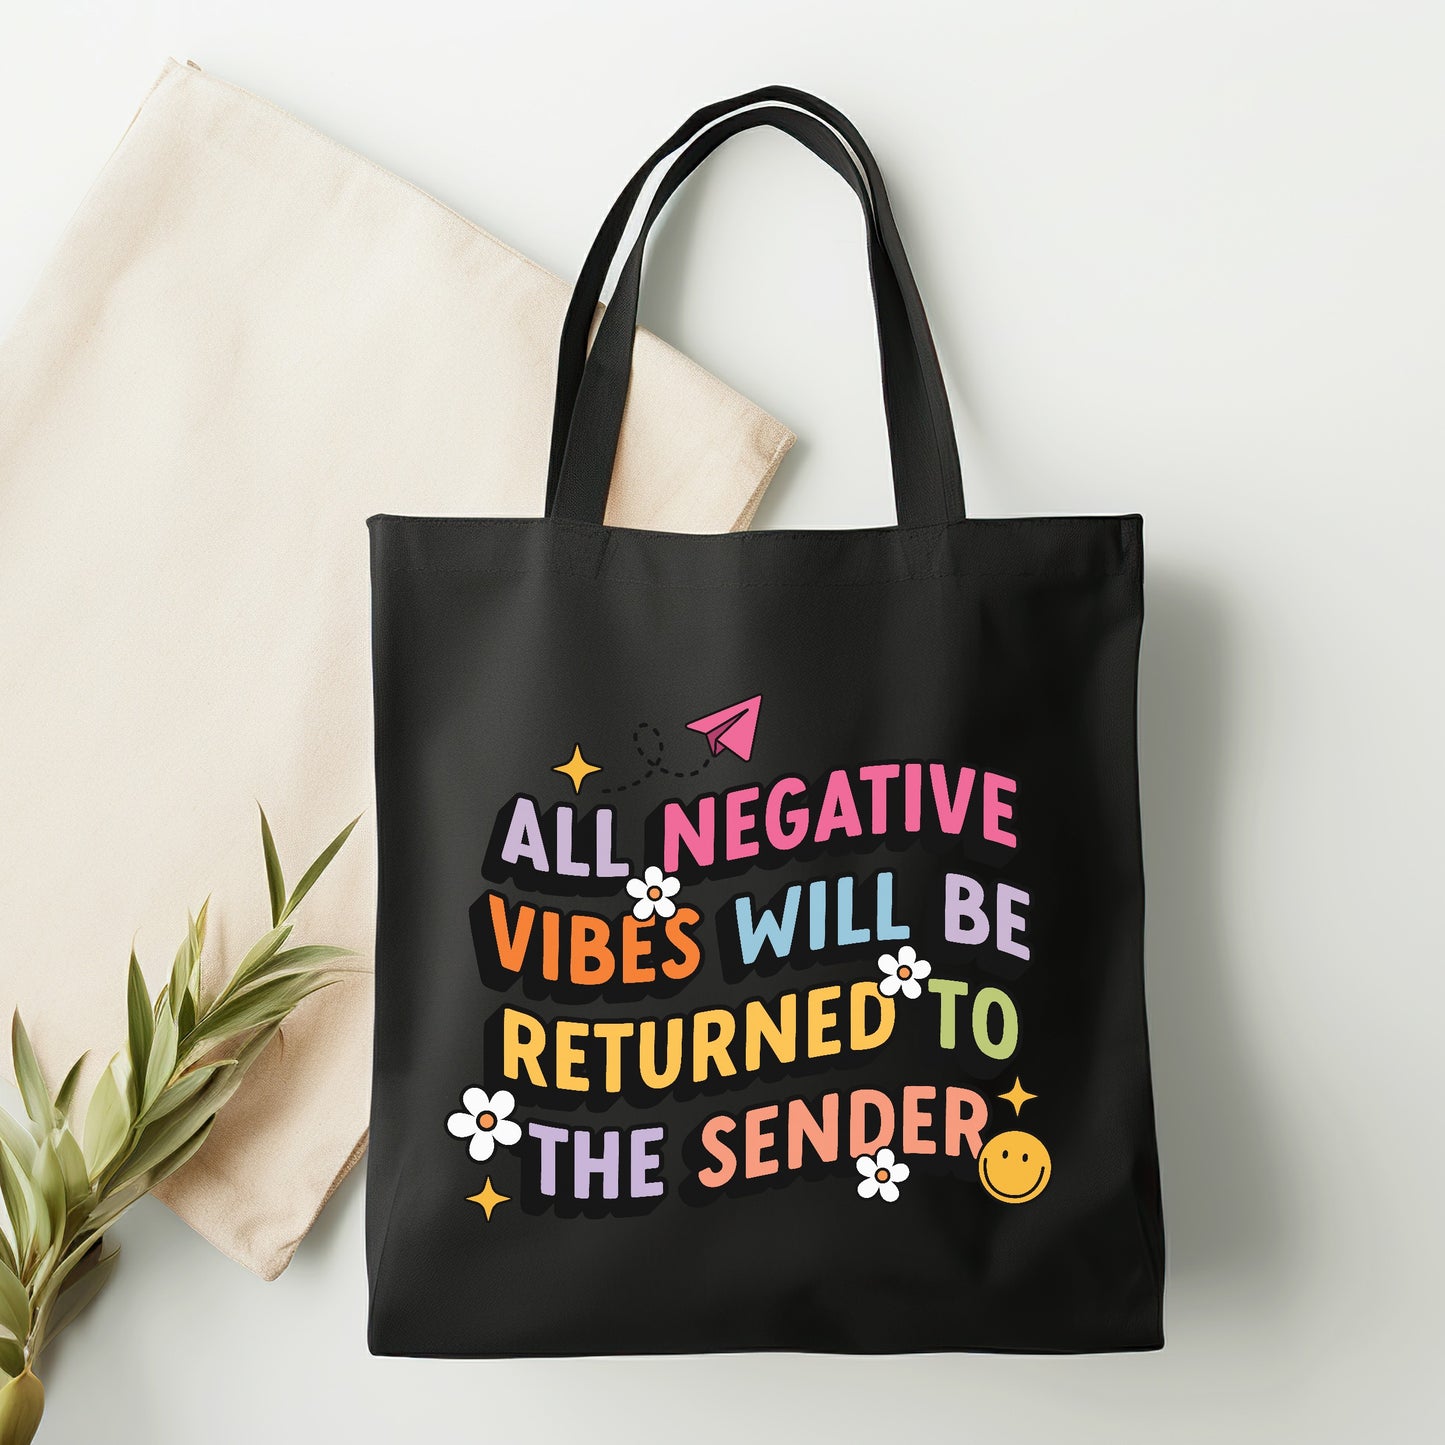 All negative vibes will be returned to sender tote bag